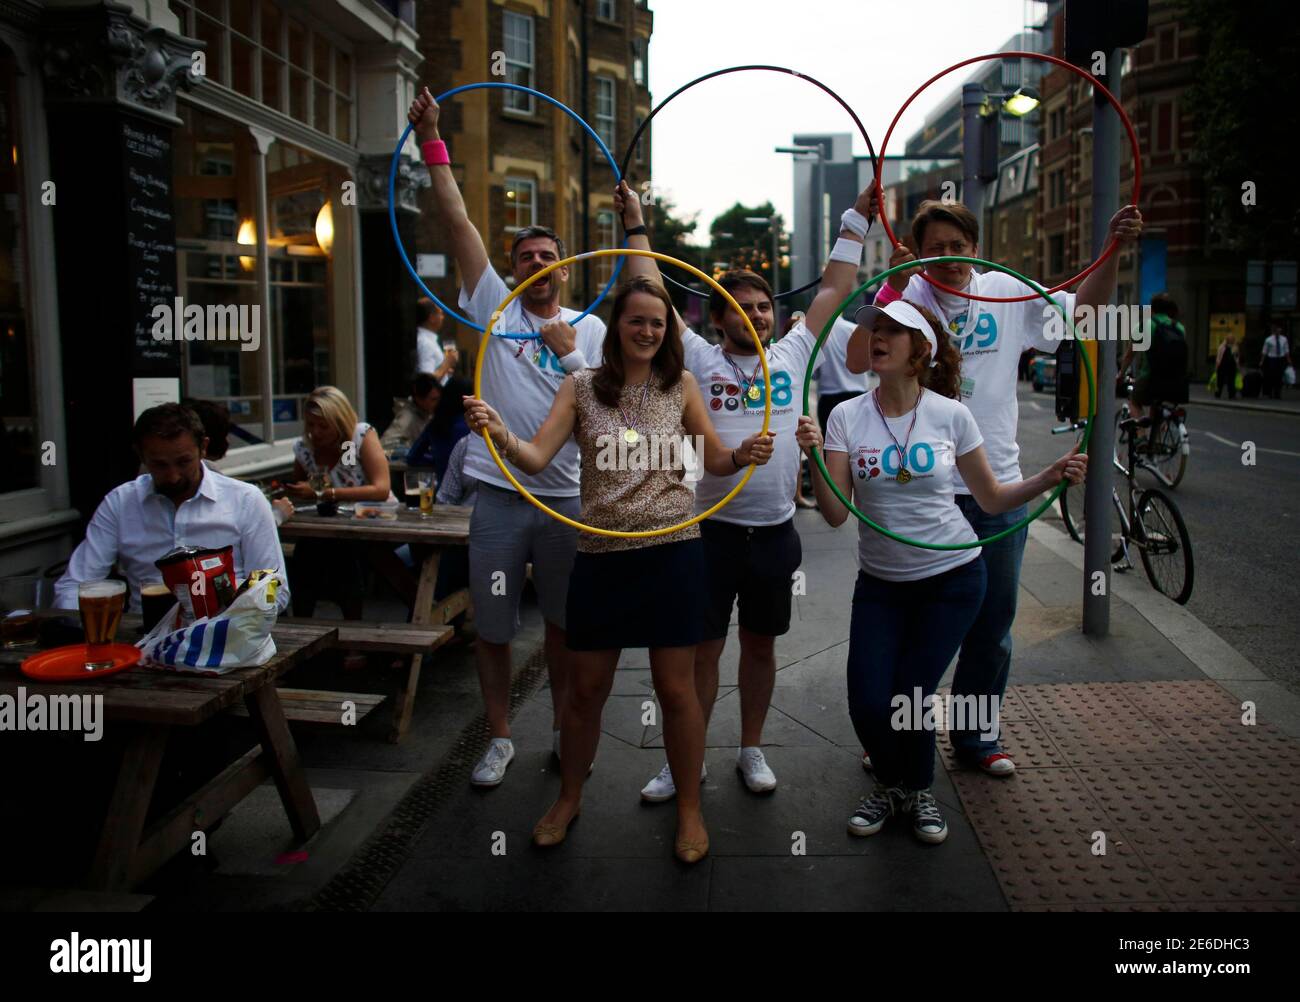 People hold hula hoops in a way that resembles the Olympic rings, to mock the copyright infringement rules on the logo during the night of the opening ceremony of London 2012 Olympic Games in London July 27, 2012. REUTERS/Mark Blinch (BRITAIN - Tags: SPORT OLYMPICS) Stock Photo